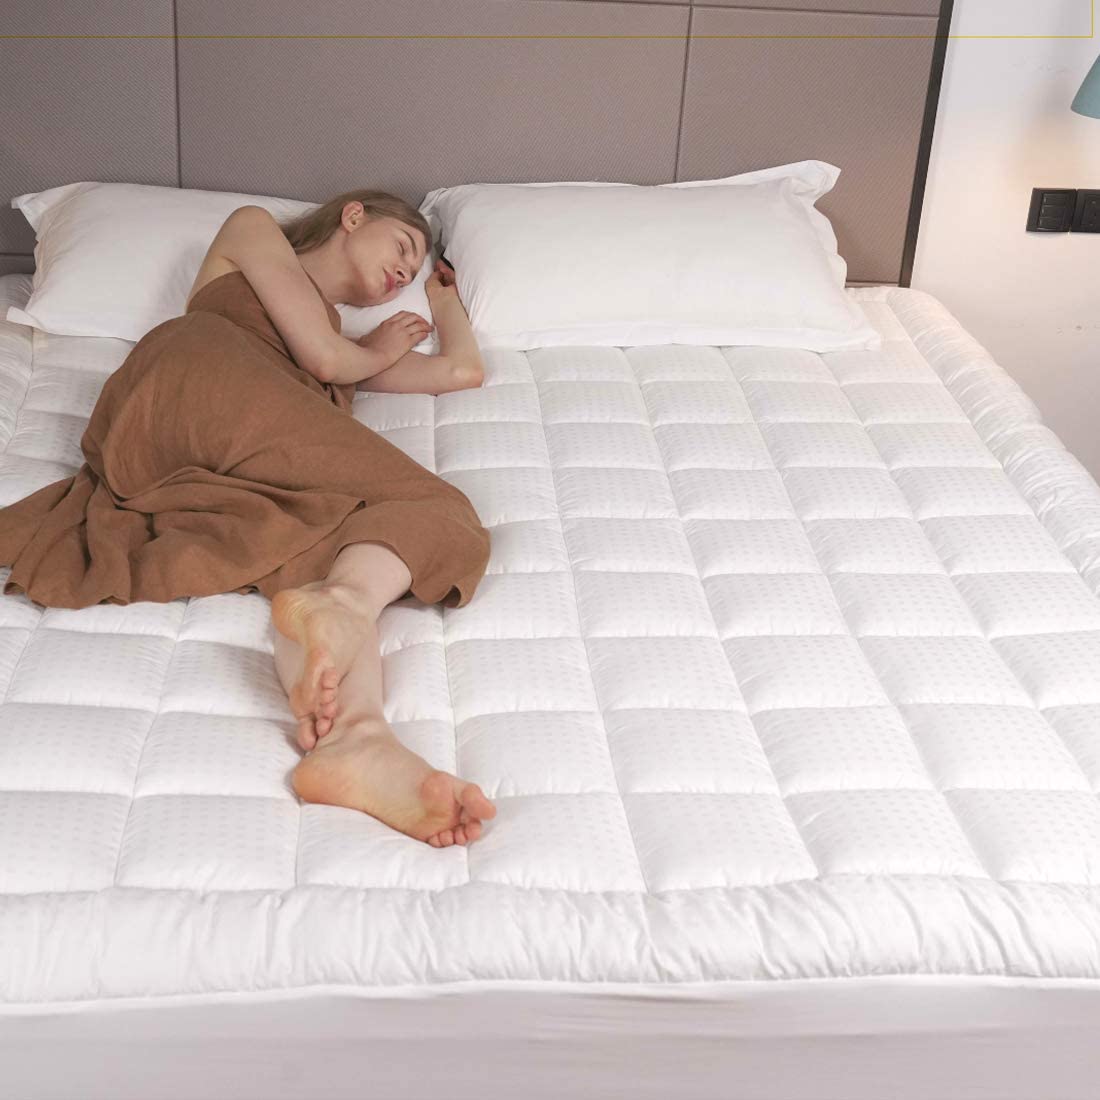 Enjoy little layers of luxury with pillow top mattress pad